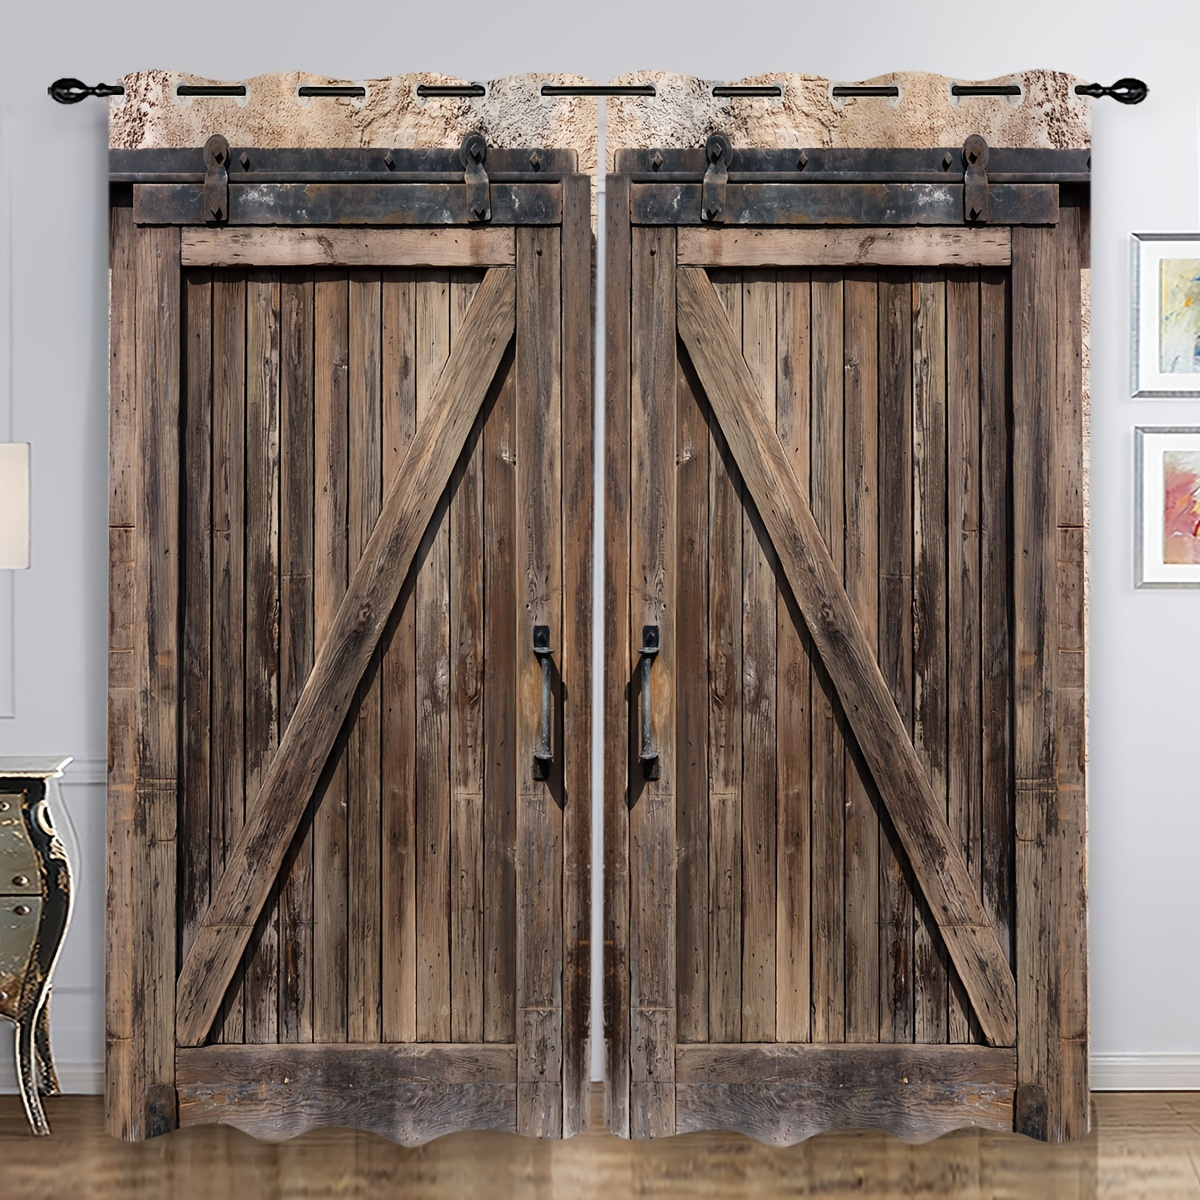 

2pcs Rustic Curtain, Wooden Door Pattern Curtain For Bathroom, Living Room, Bedroom, Window Curtains, Home Decoration